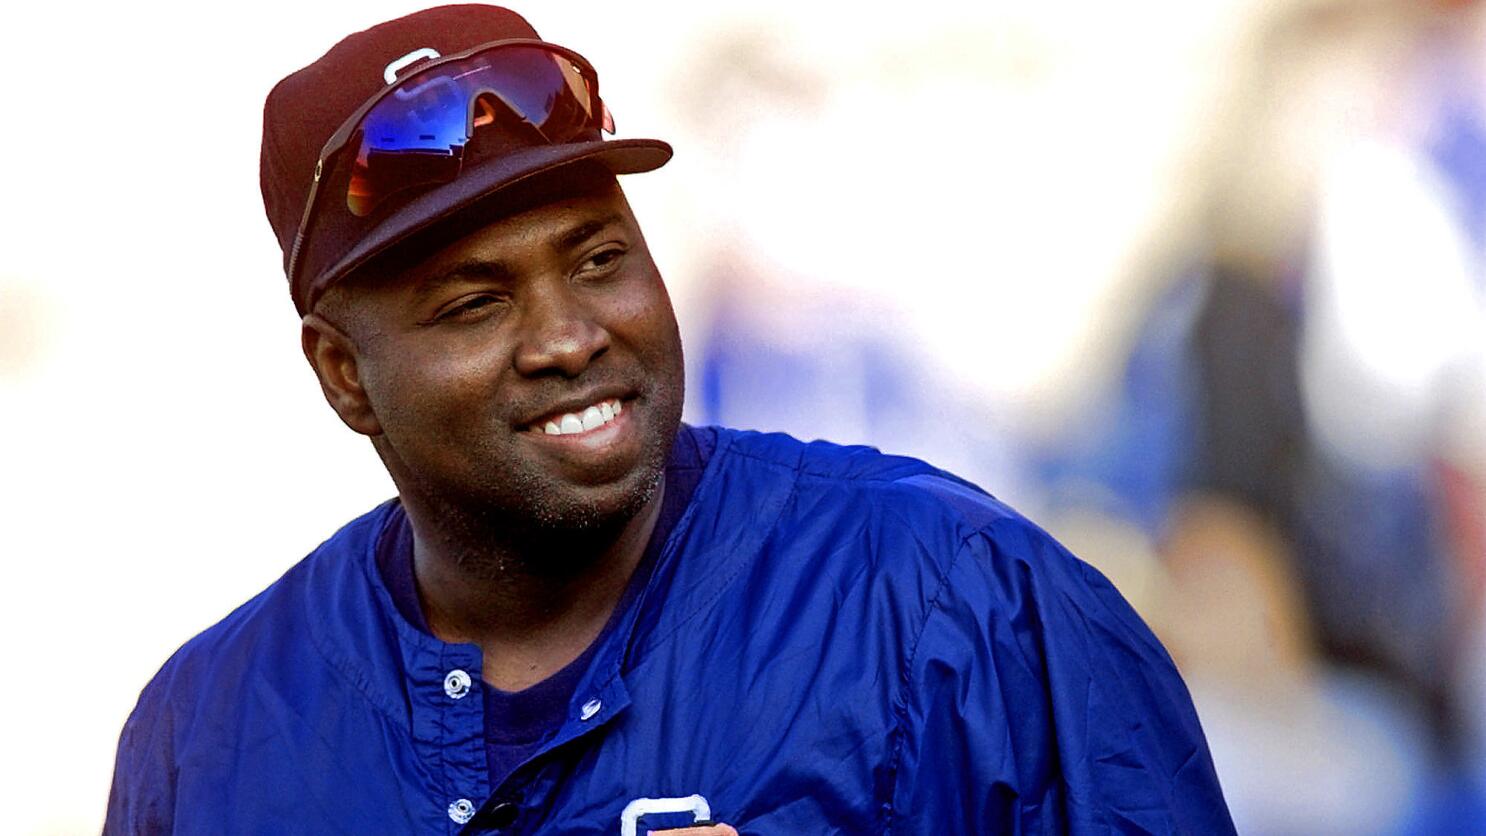 Tony Gwynn honored following his final game as a San Diego Padre in 2001 